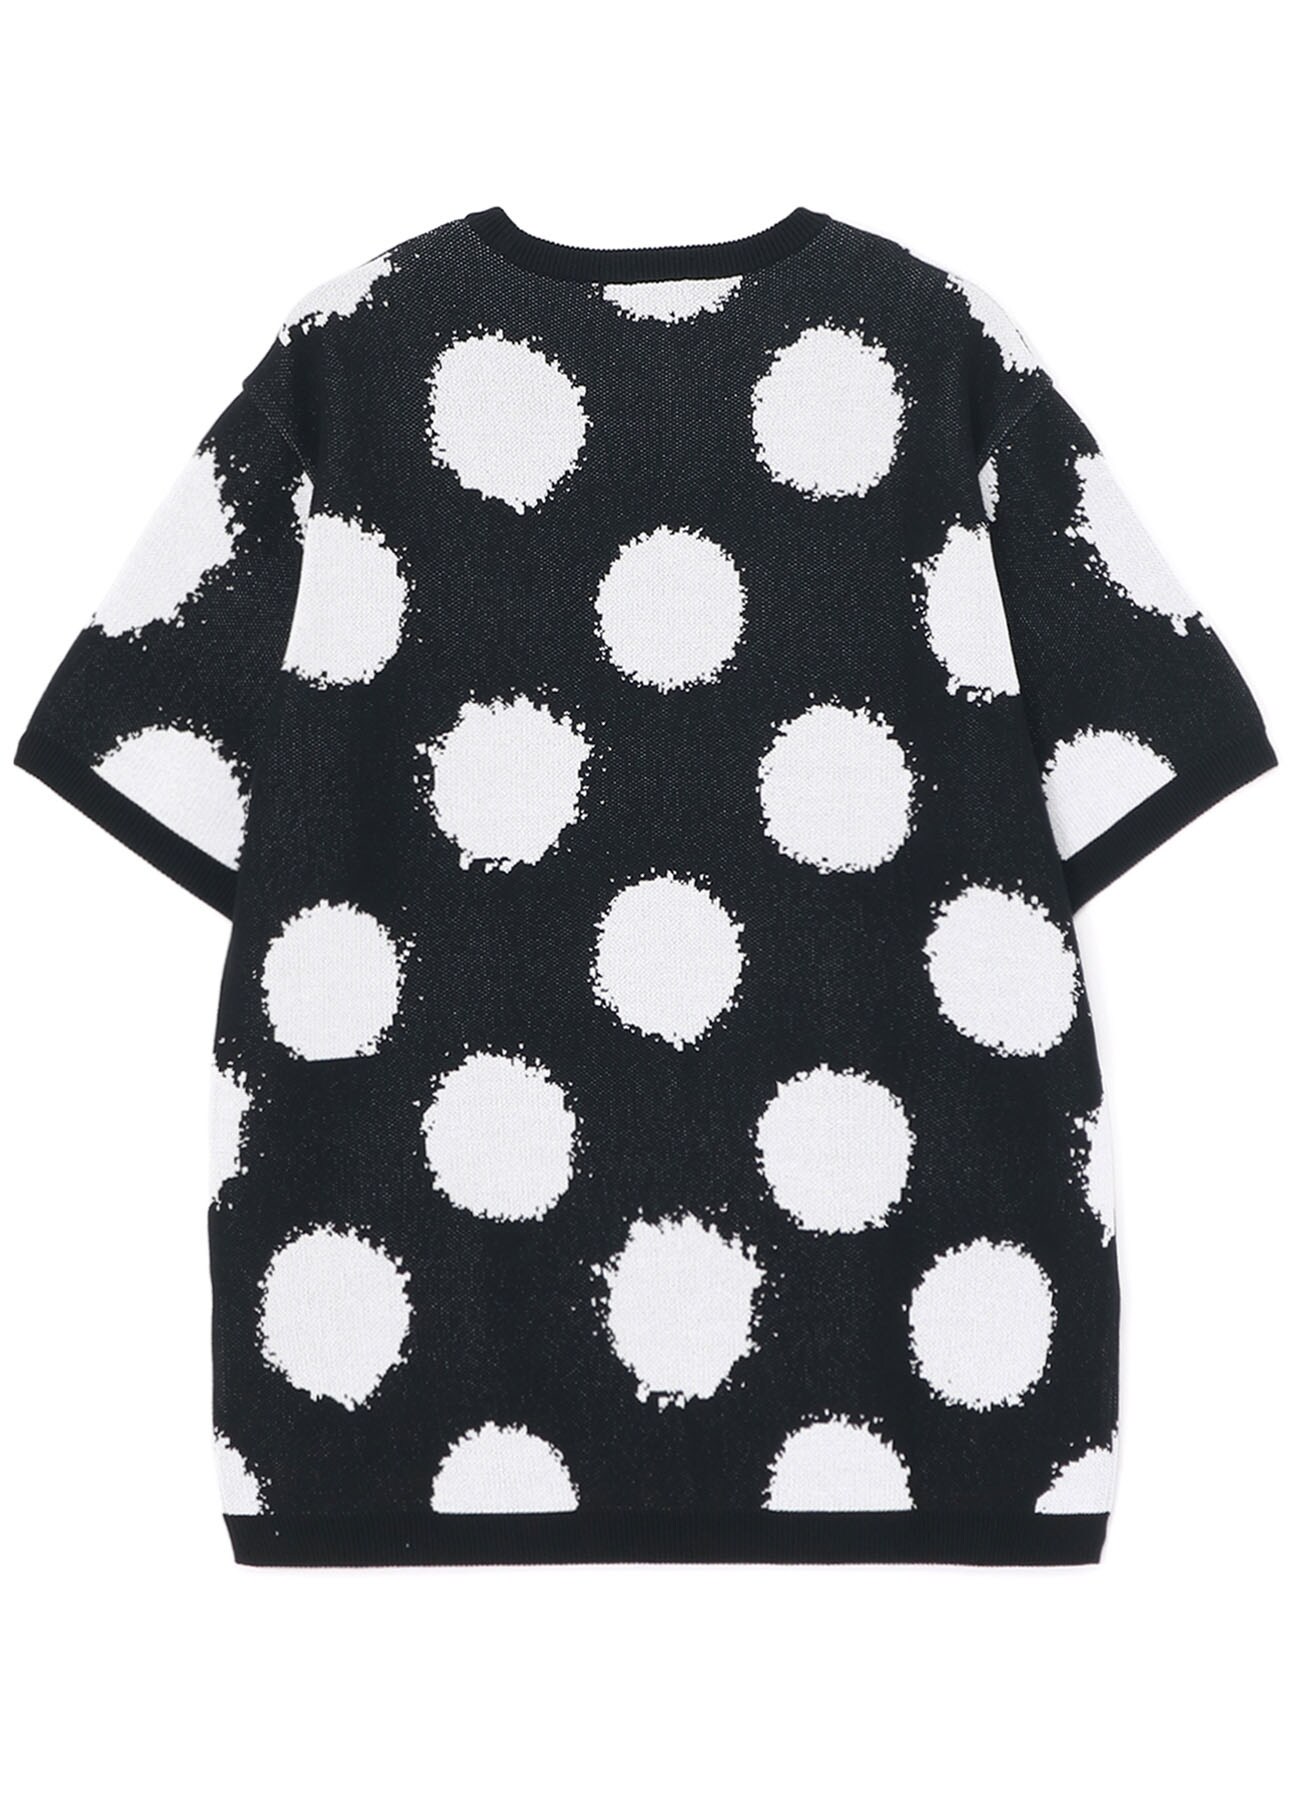 COTTON/POLYESTER KNITTED T-SHIRT